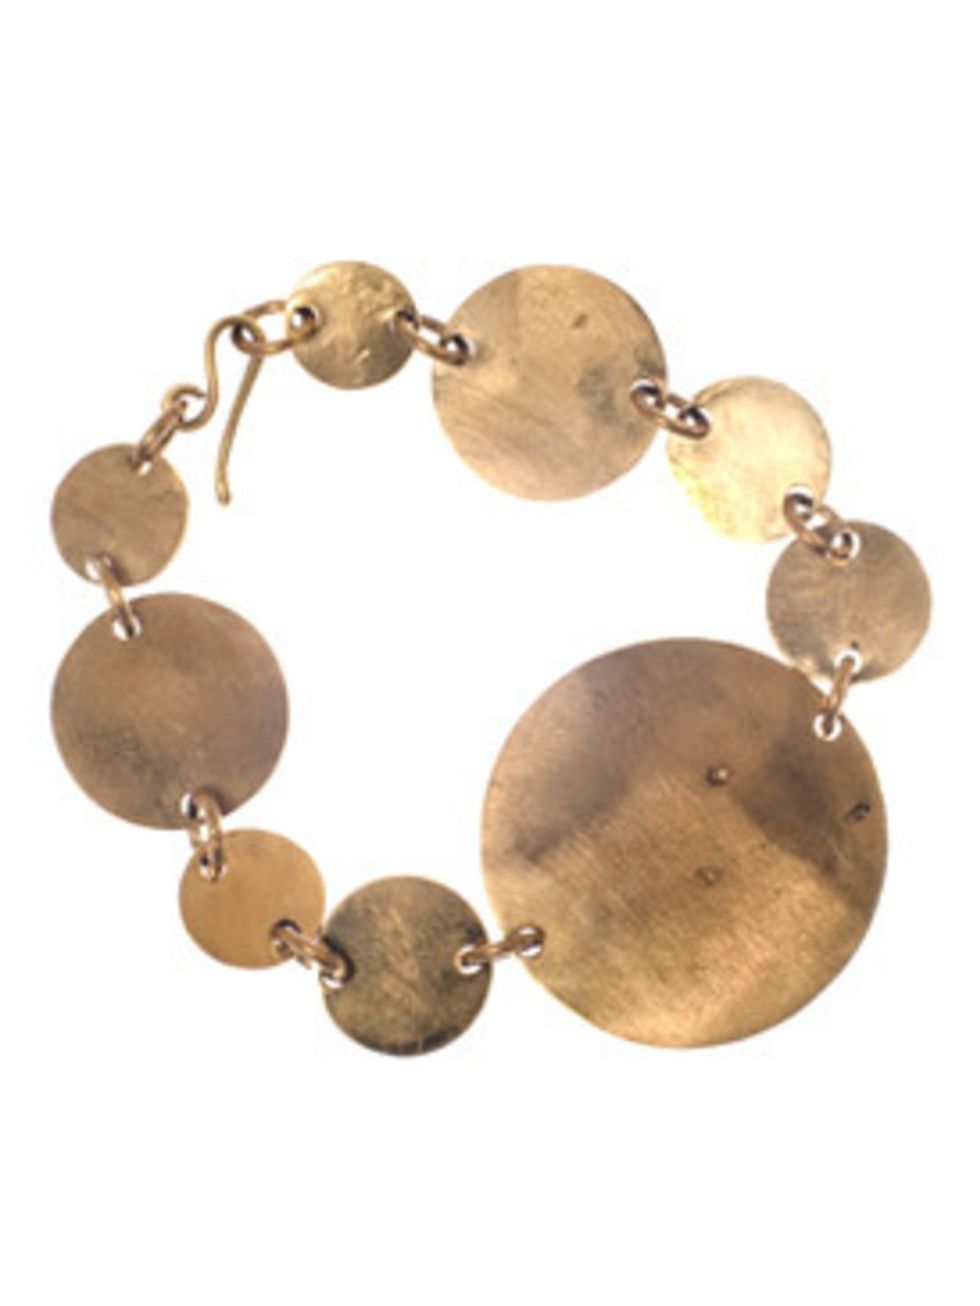 <p><a href="http://www.elleuk.com/shopping/designer-shopping/eco-shopping-special-spring-summer-2008">made</a> specialise in producing must-have jewellery created from recycled materials by specially trained artisans in Nairobi. They currently have collec